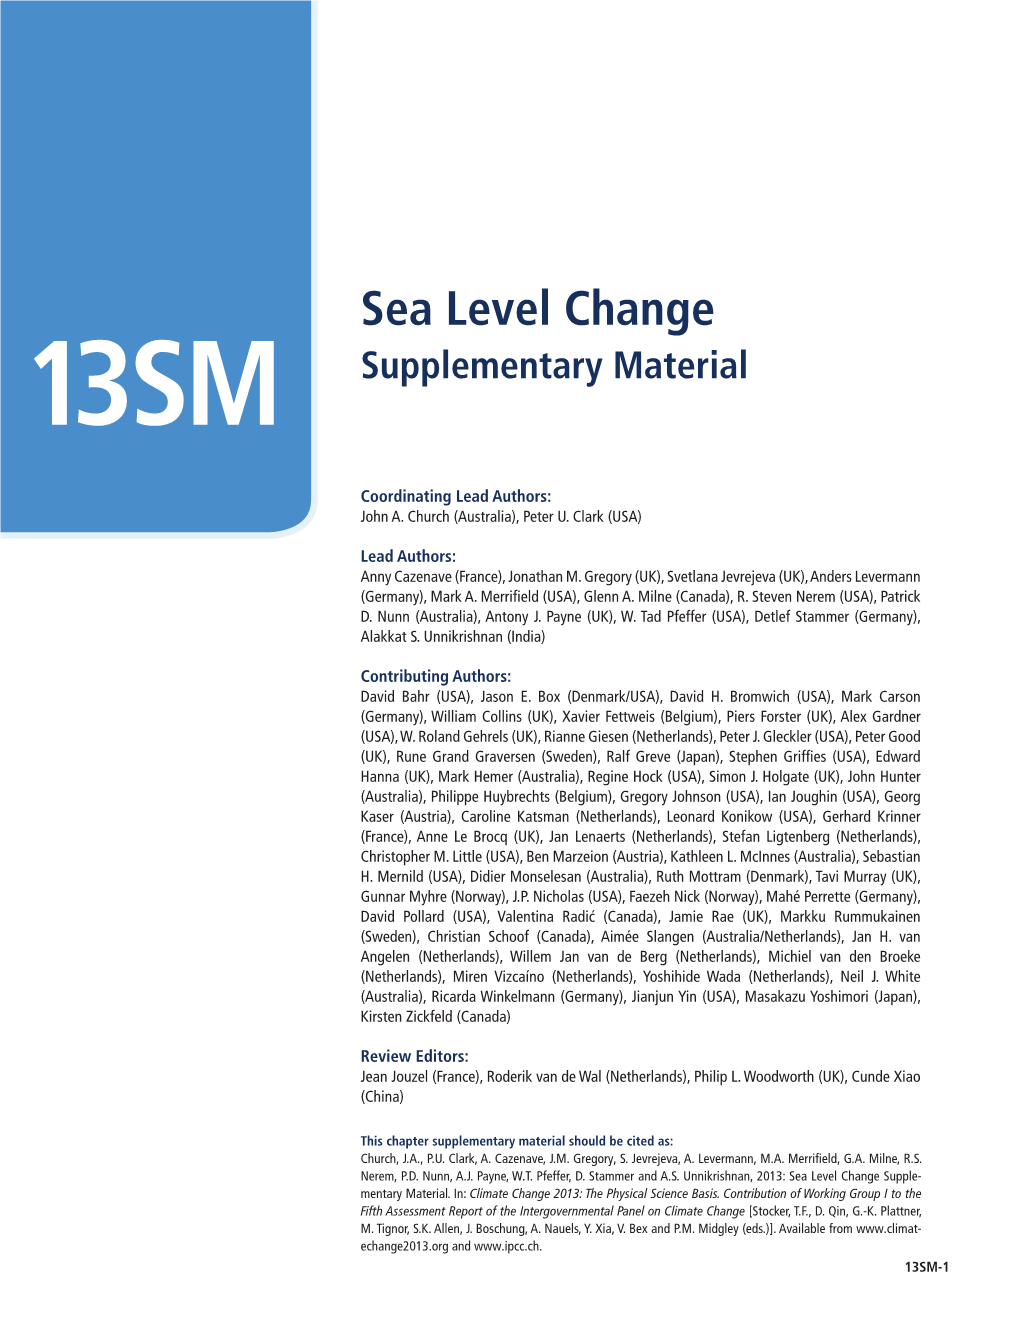 Sea Level Change 13SM Supplementary Material